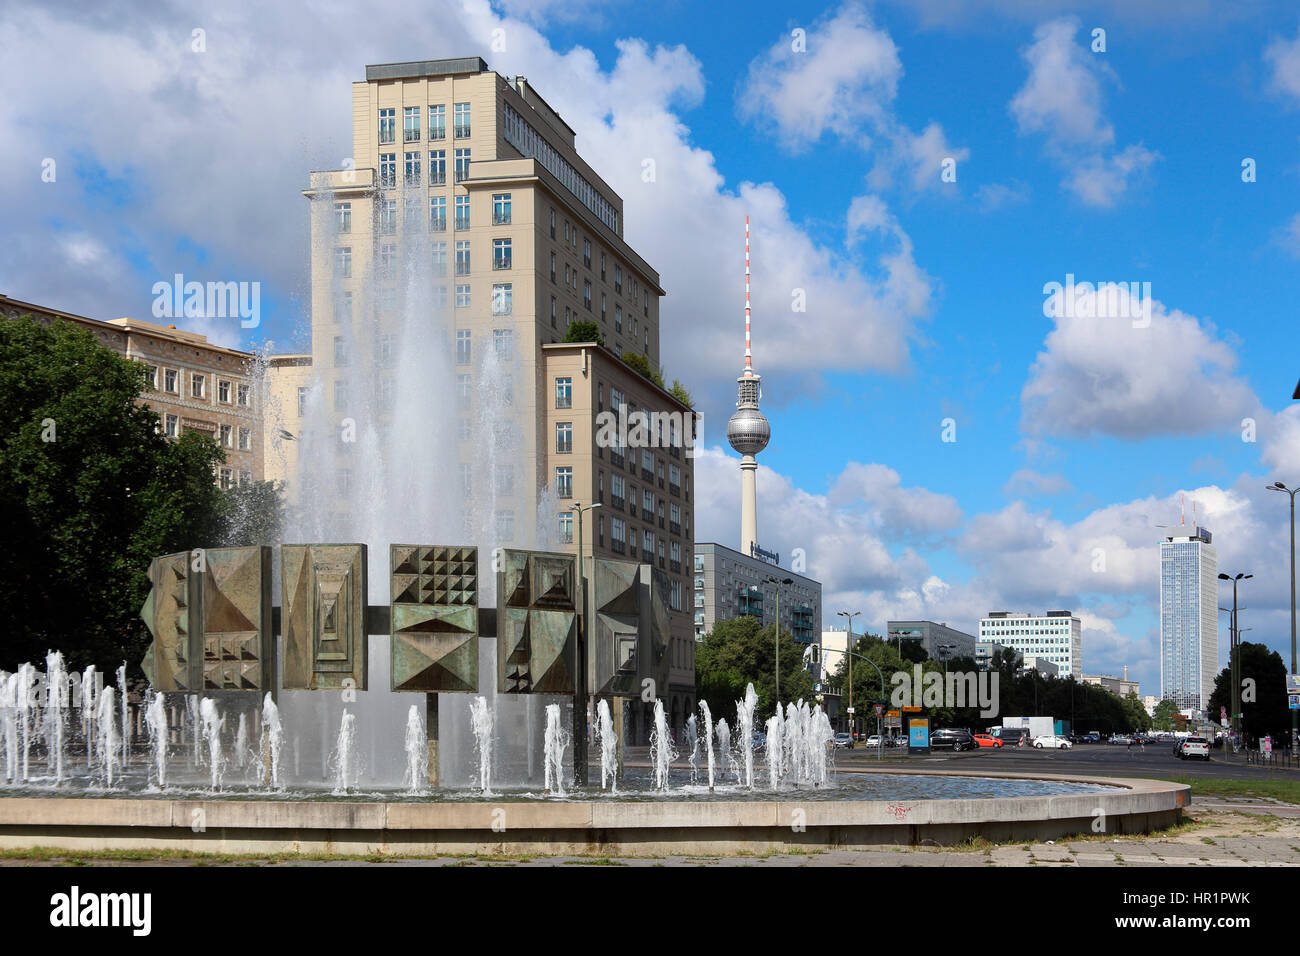 Berlin Strausberger square Karl Marx Allee Stock Photo